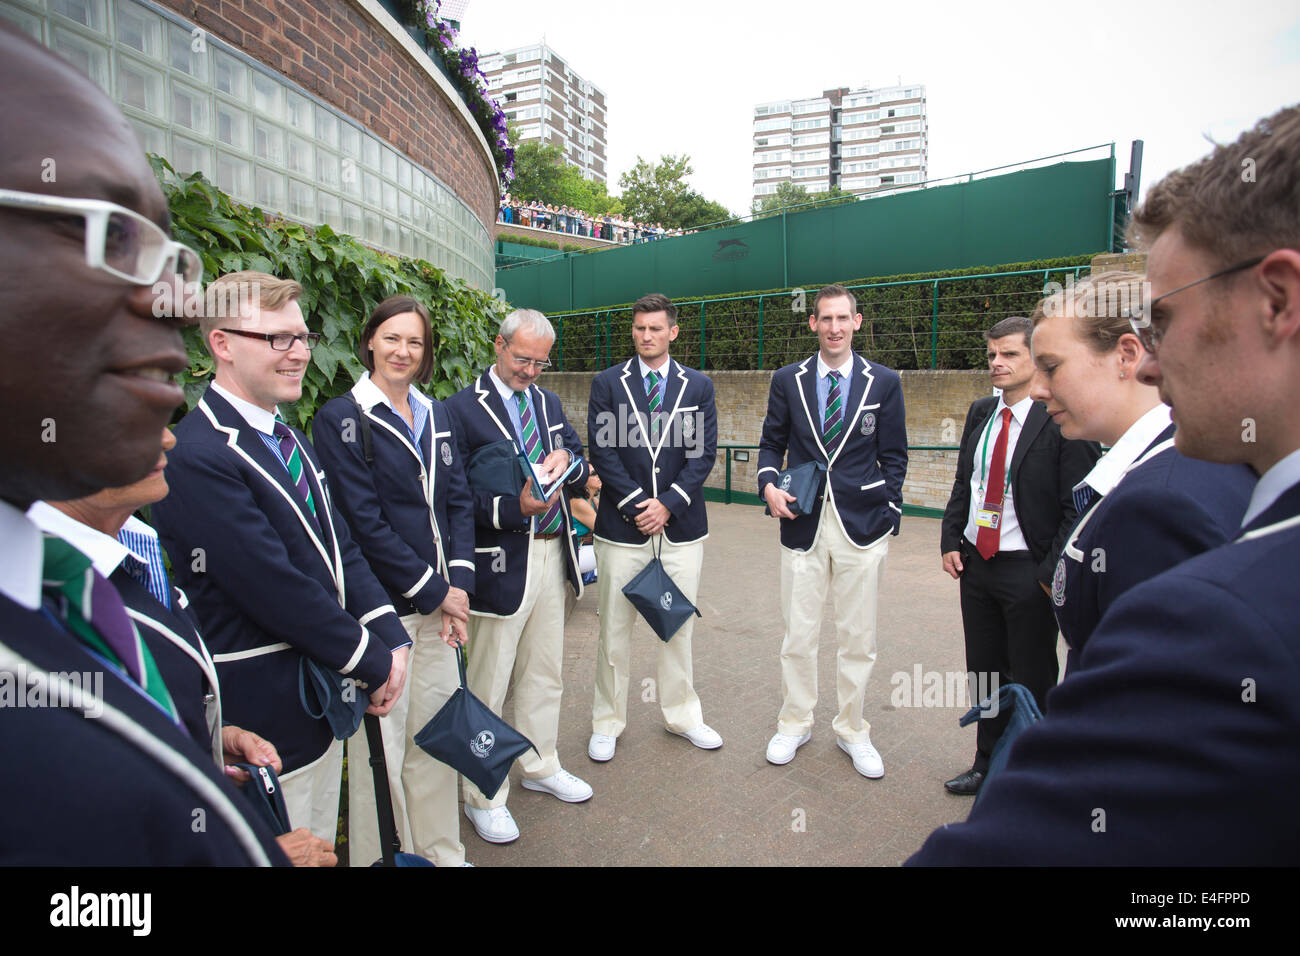 Linesman and umpires before a match at Wimbledon Tennis Championships 2014, Southwest London, England, UK Stock Photo